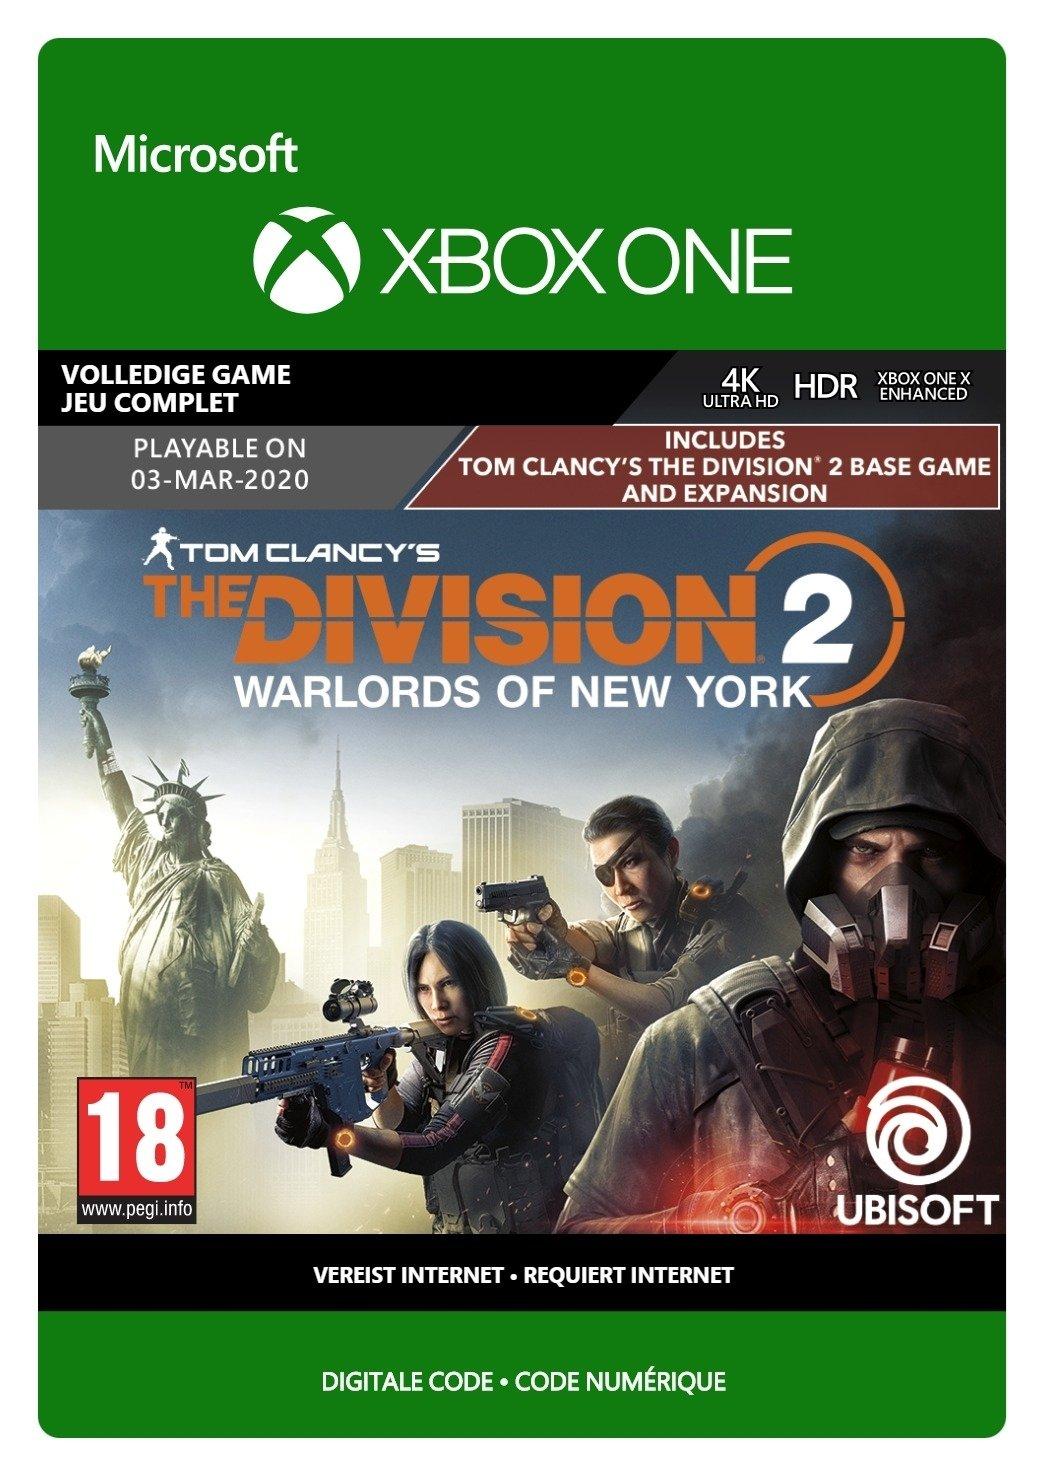 Tom Clancy's The Division 2: Warlords of New York Edition - Xbox One - Game | G3Q-00896 (6f3f9ecd-10ca-ce4b-b1e4-180f8a1d08bb)